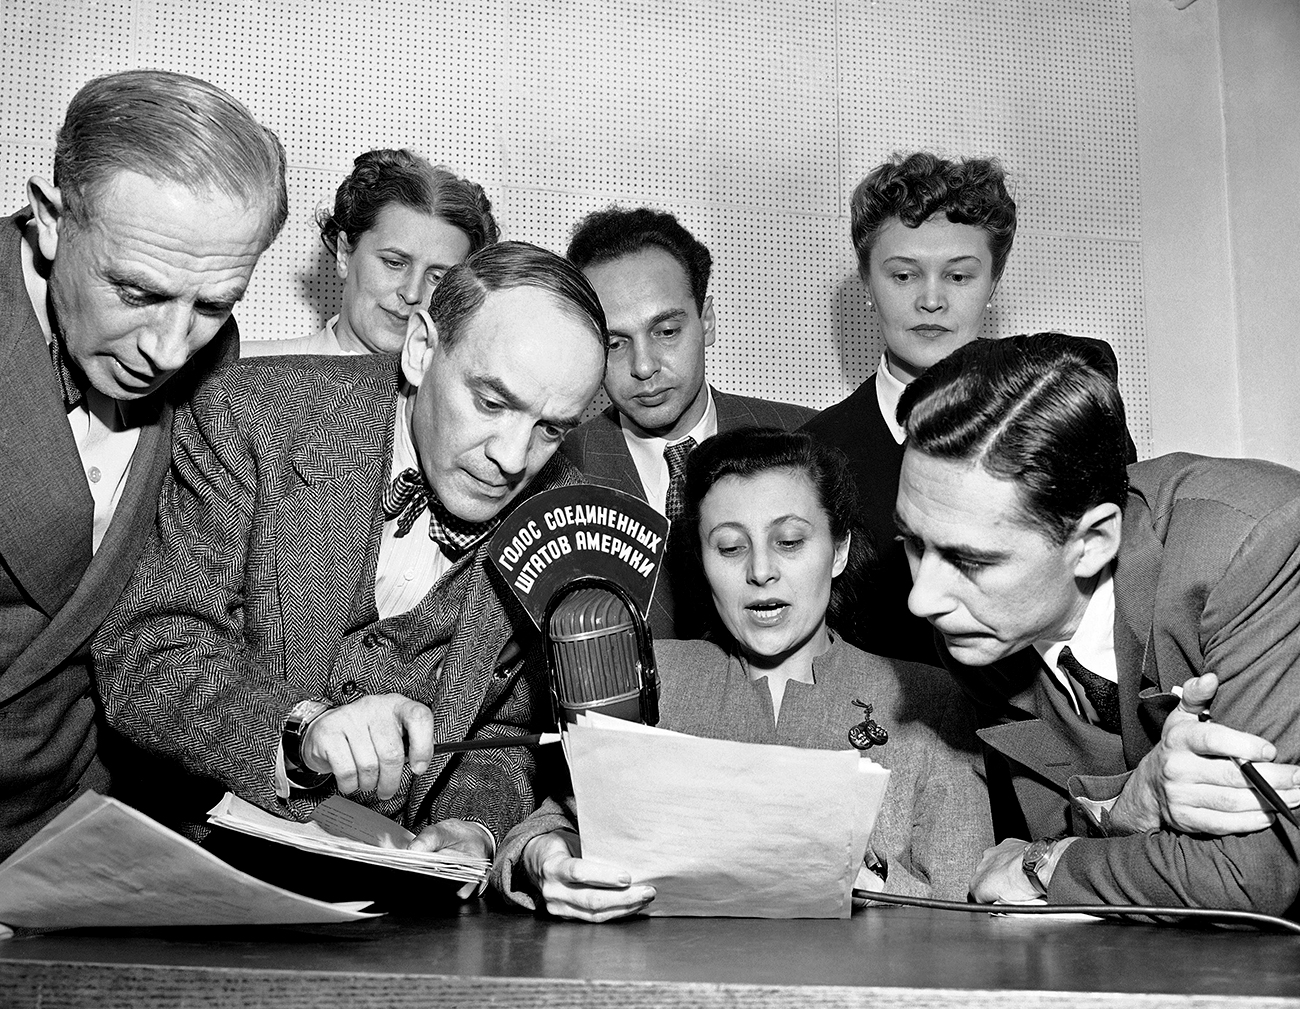 A group of State Department announcers huddle around the microphone after the initial shortwave broadcast in Russian to Russia from New York City on Feb. 17, 1947. The announcers, Russian-born American citizens, are (front row) Boris Brodenov; James Schigorin; Elena Bates (seated); Victor Franzusoff; (rear row) Katherine Elene; Vladimir Postman and Tatiana Hecker. Sign in Russian on the microphone means "The Voice of the United States of America."